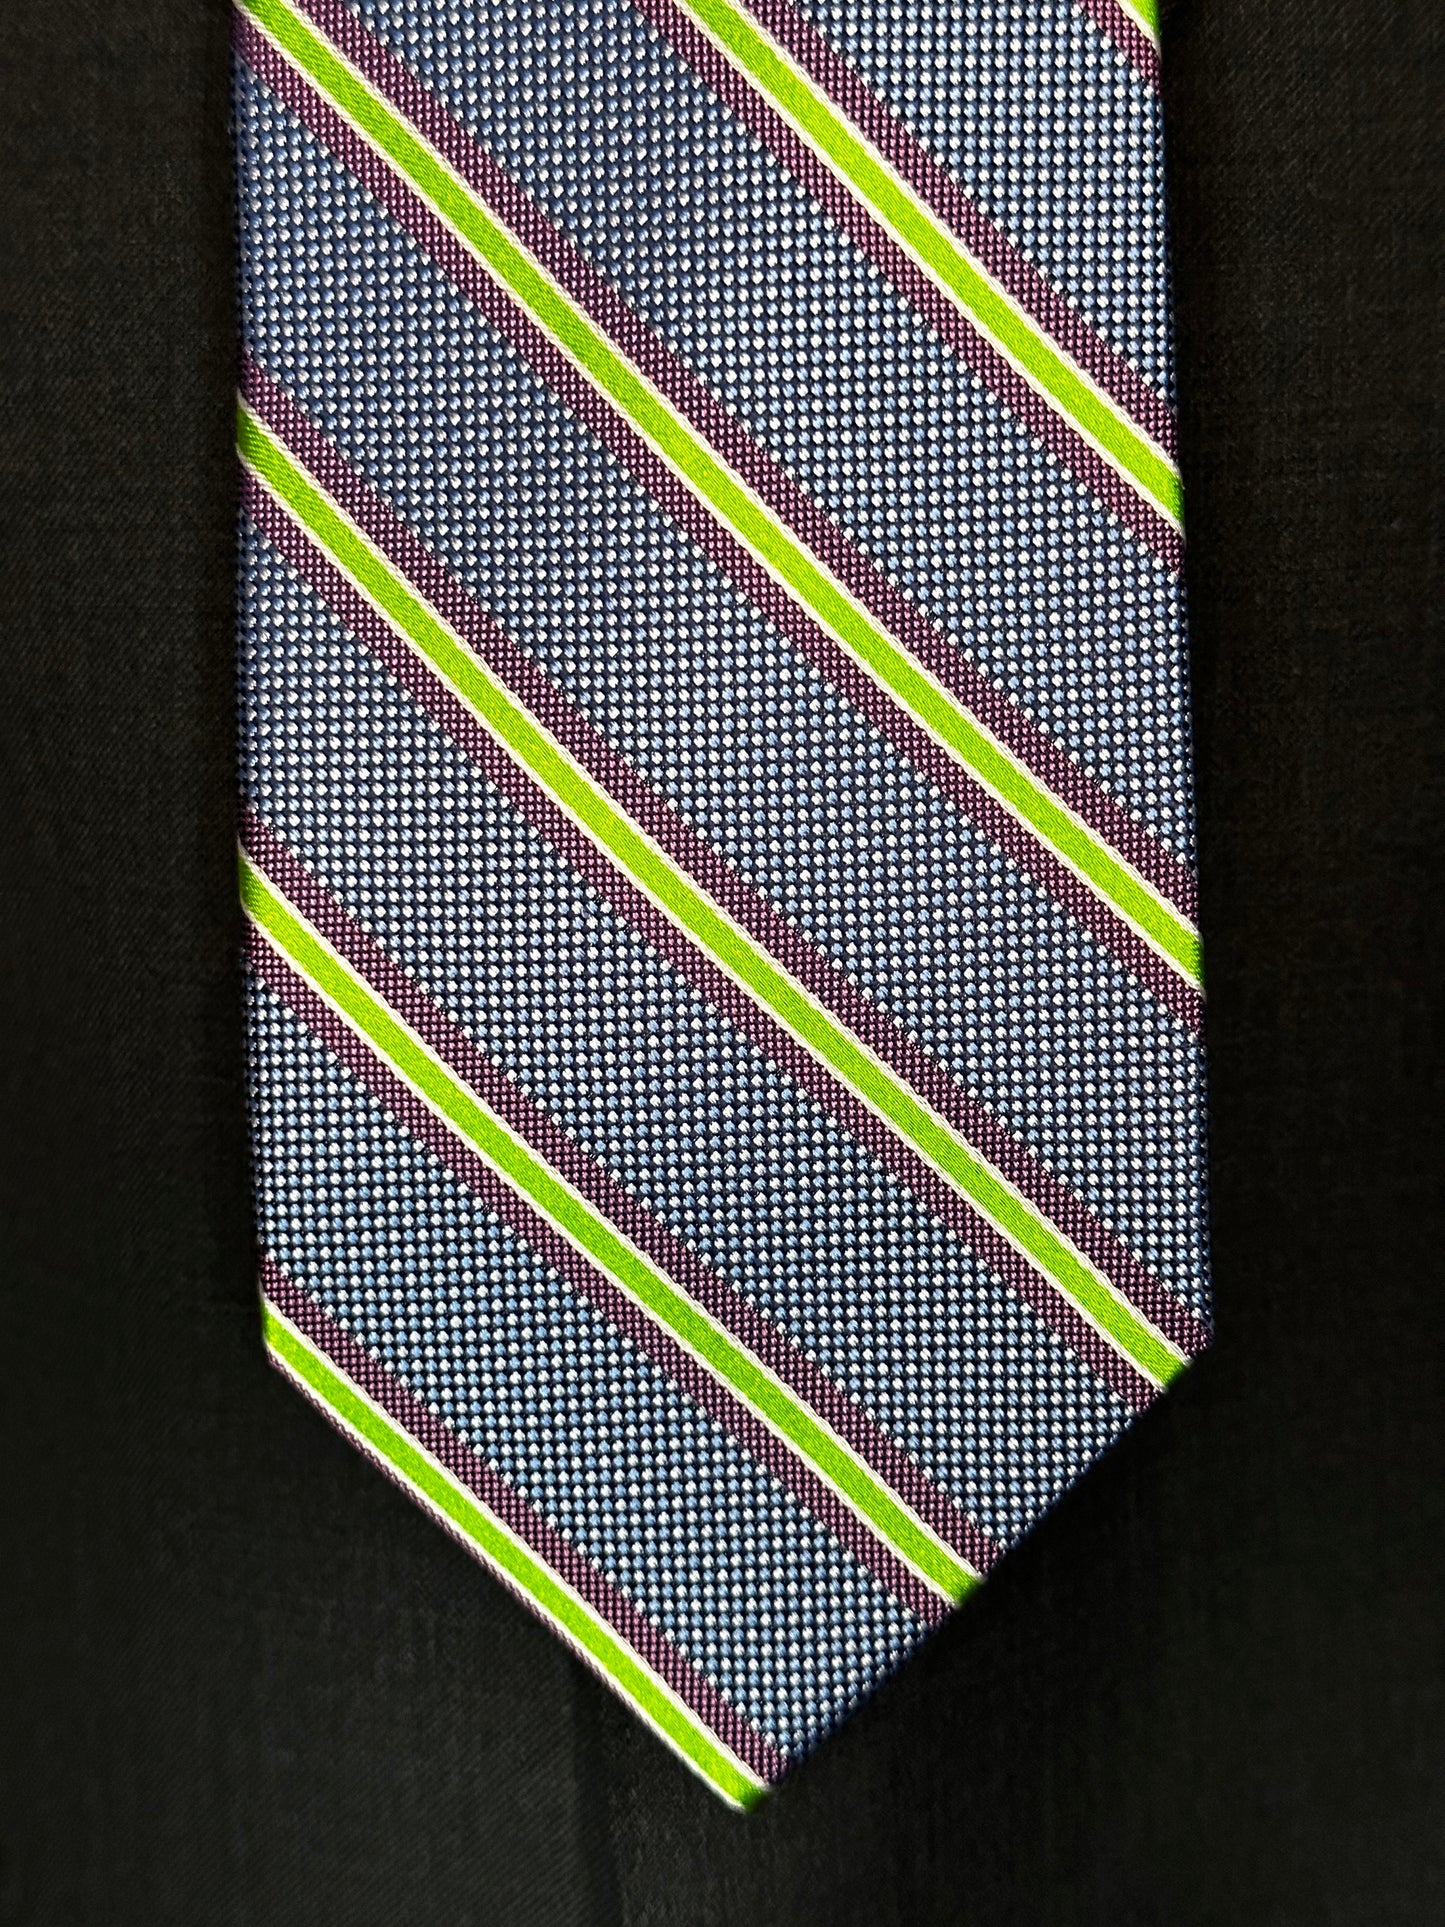 A general all around great tie to wear with any suit, shirt for any occasion. With two different types of silk in the same necktie, the stripe being satin and the broad section being woven, this tie makes an all day knot that does not have to be readjusted. With colorations of kelly green and purple stripes, you cannot make a mistake creating a look with this tie pairing with any suit in your closet.